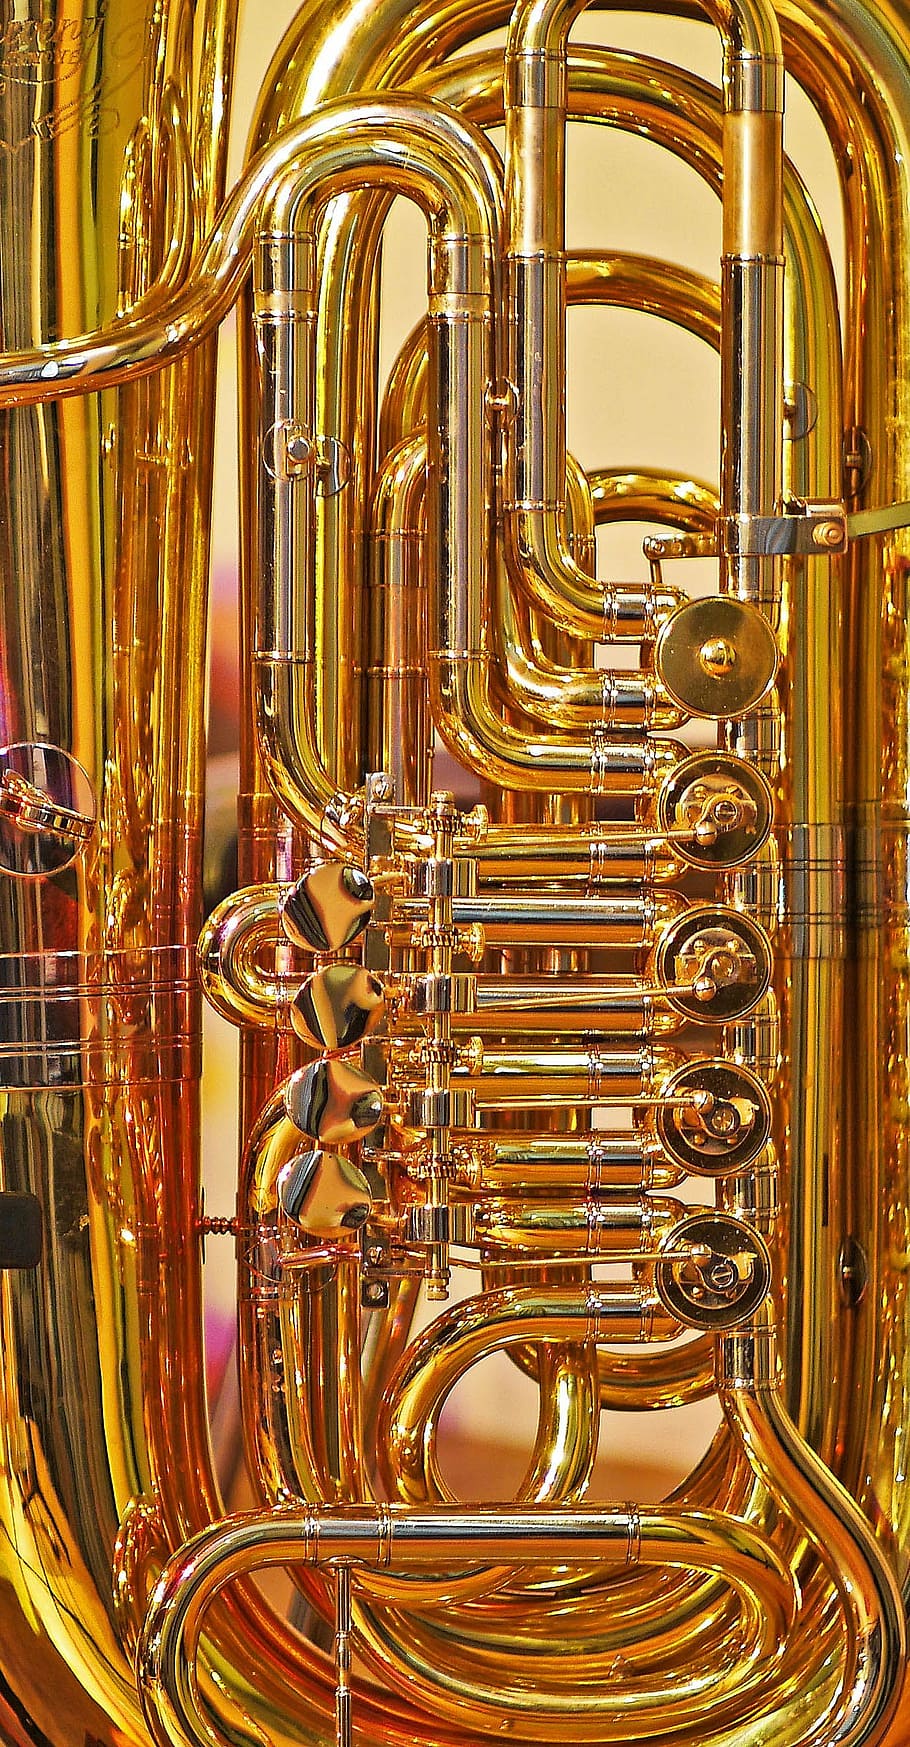 tuba, valves, pipe, shiny, instrument, gold, brass instrument, brass, blow, view details